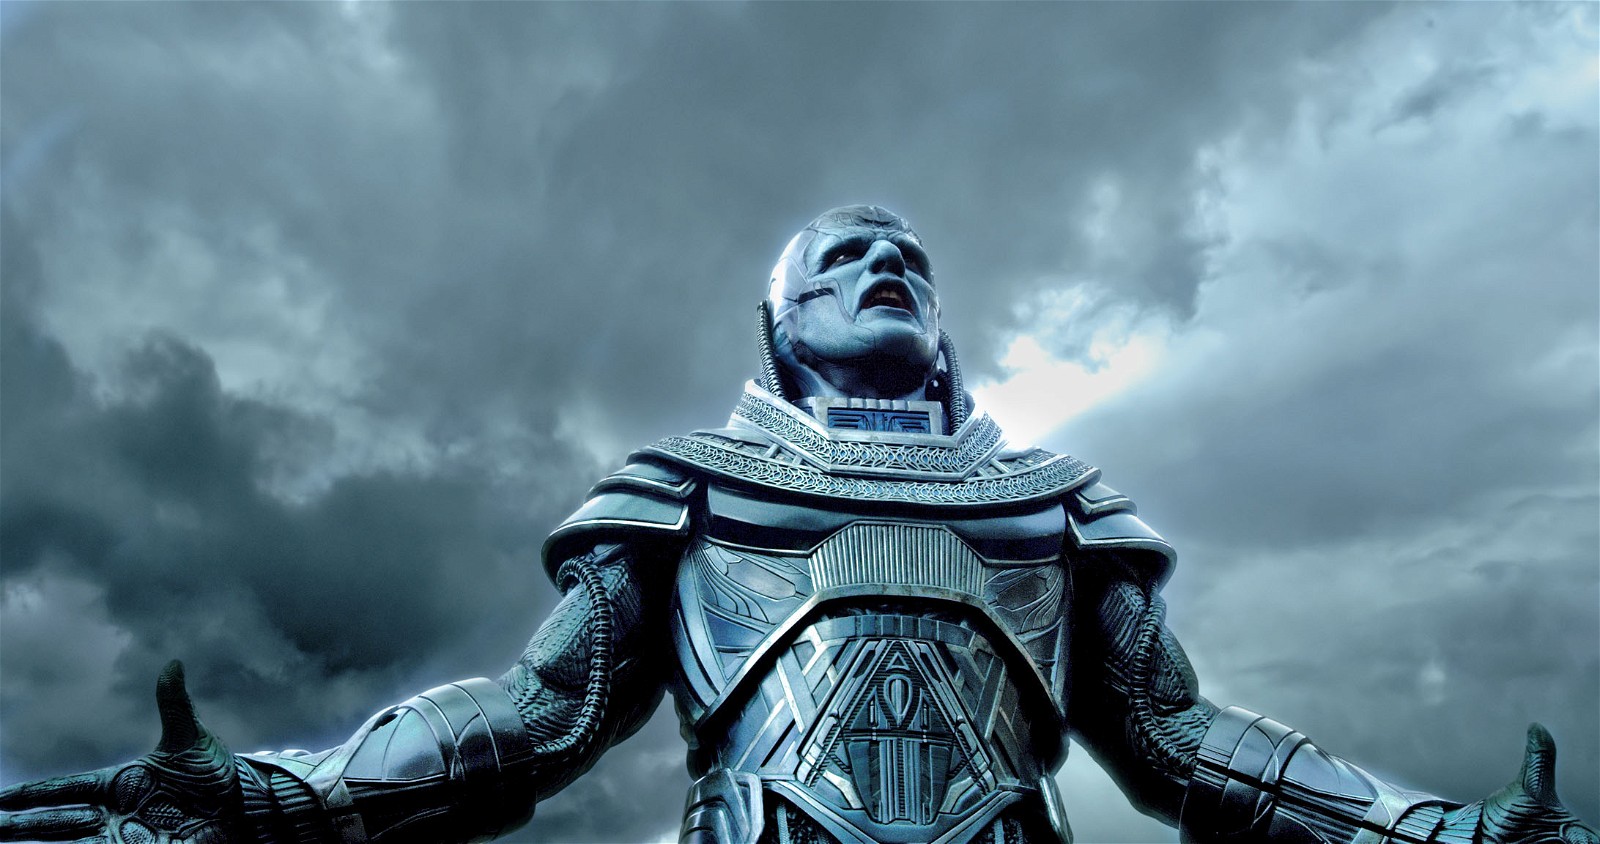 Oscar Isaac played the role of Apocalypse in the Fox film X-Men: Apocalypse